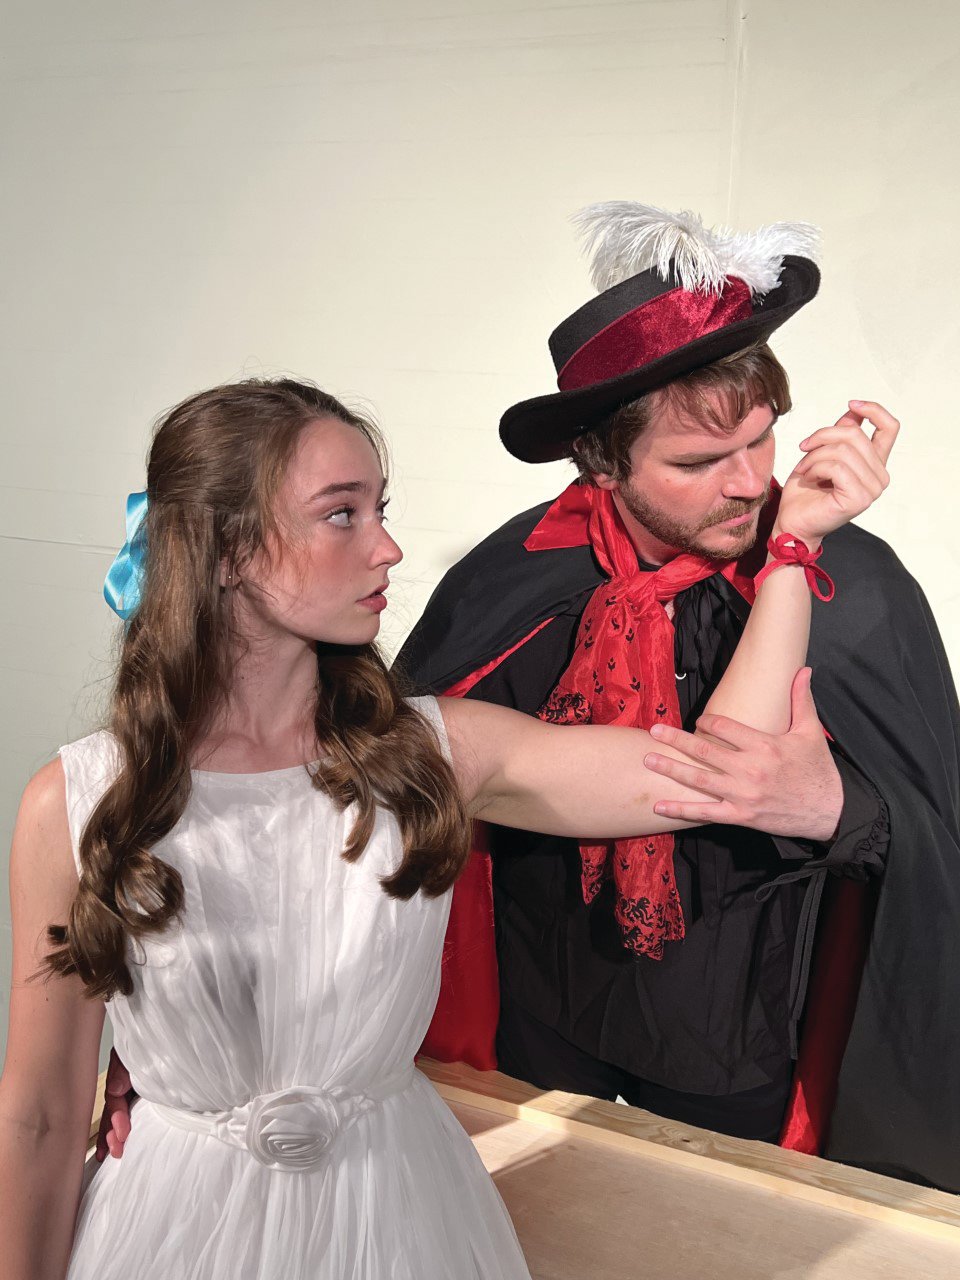 El Gallo (Jordan Jones) admires the red ribbon Luisa (Emmie Wright) has placed on the spot where he first touched her. The Fantasticks opens Wednesday at Myers Dinner Theatre.